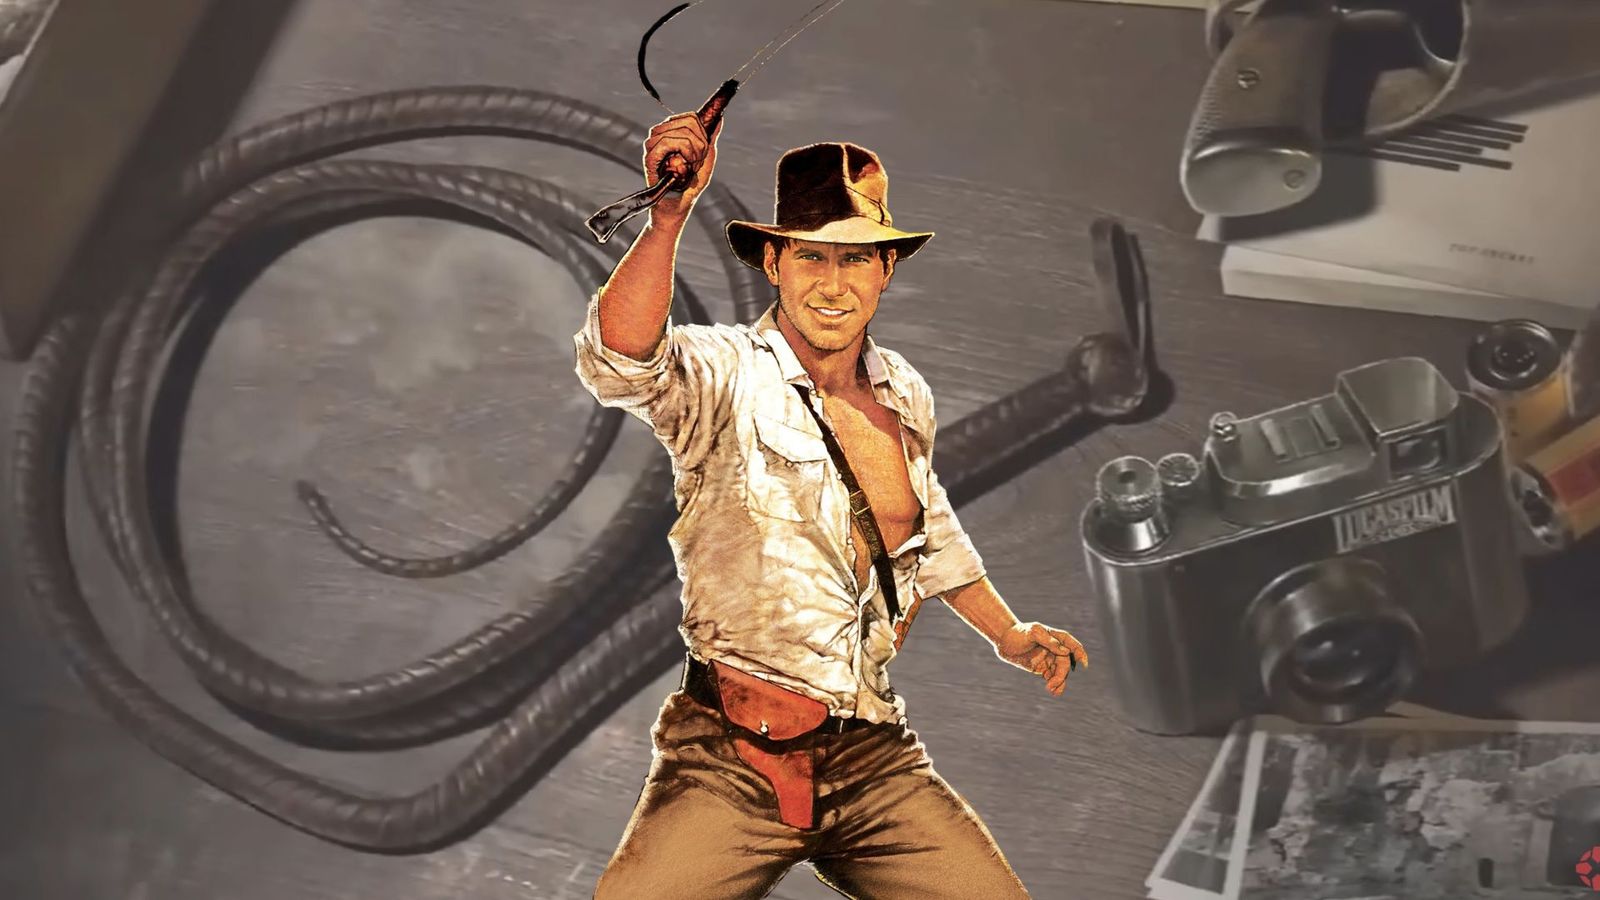 An image of Indiana Jones using his whip, in the background we see his whip and a camera that has the Lucasfilm logo ingrained